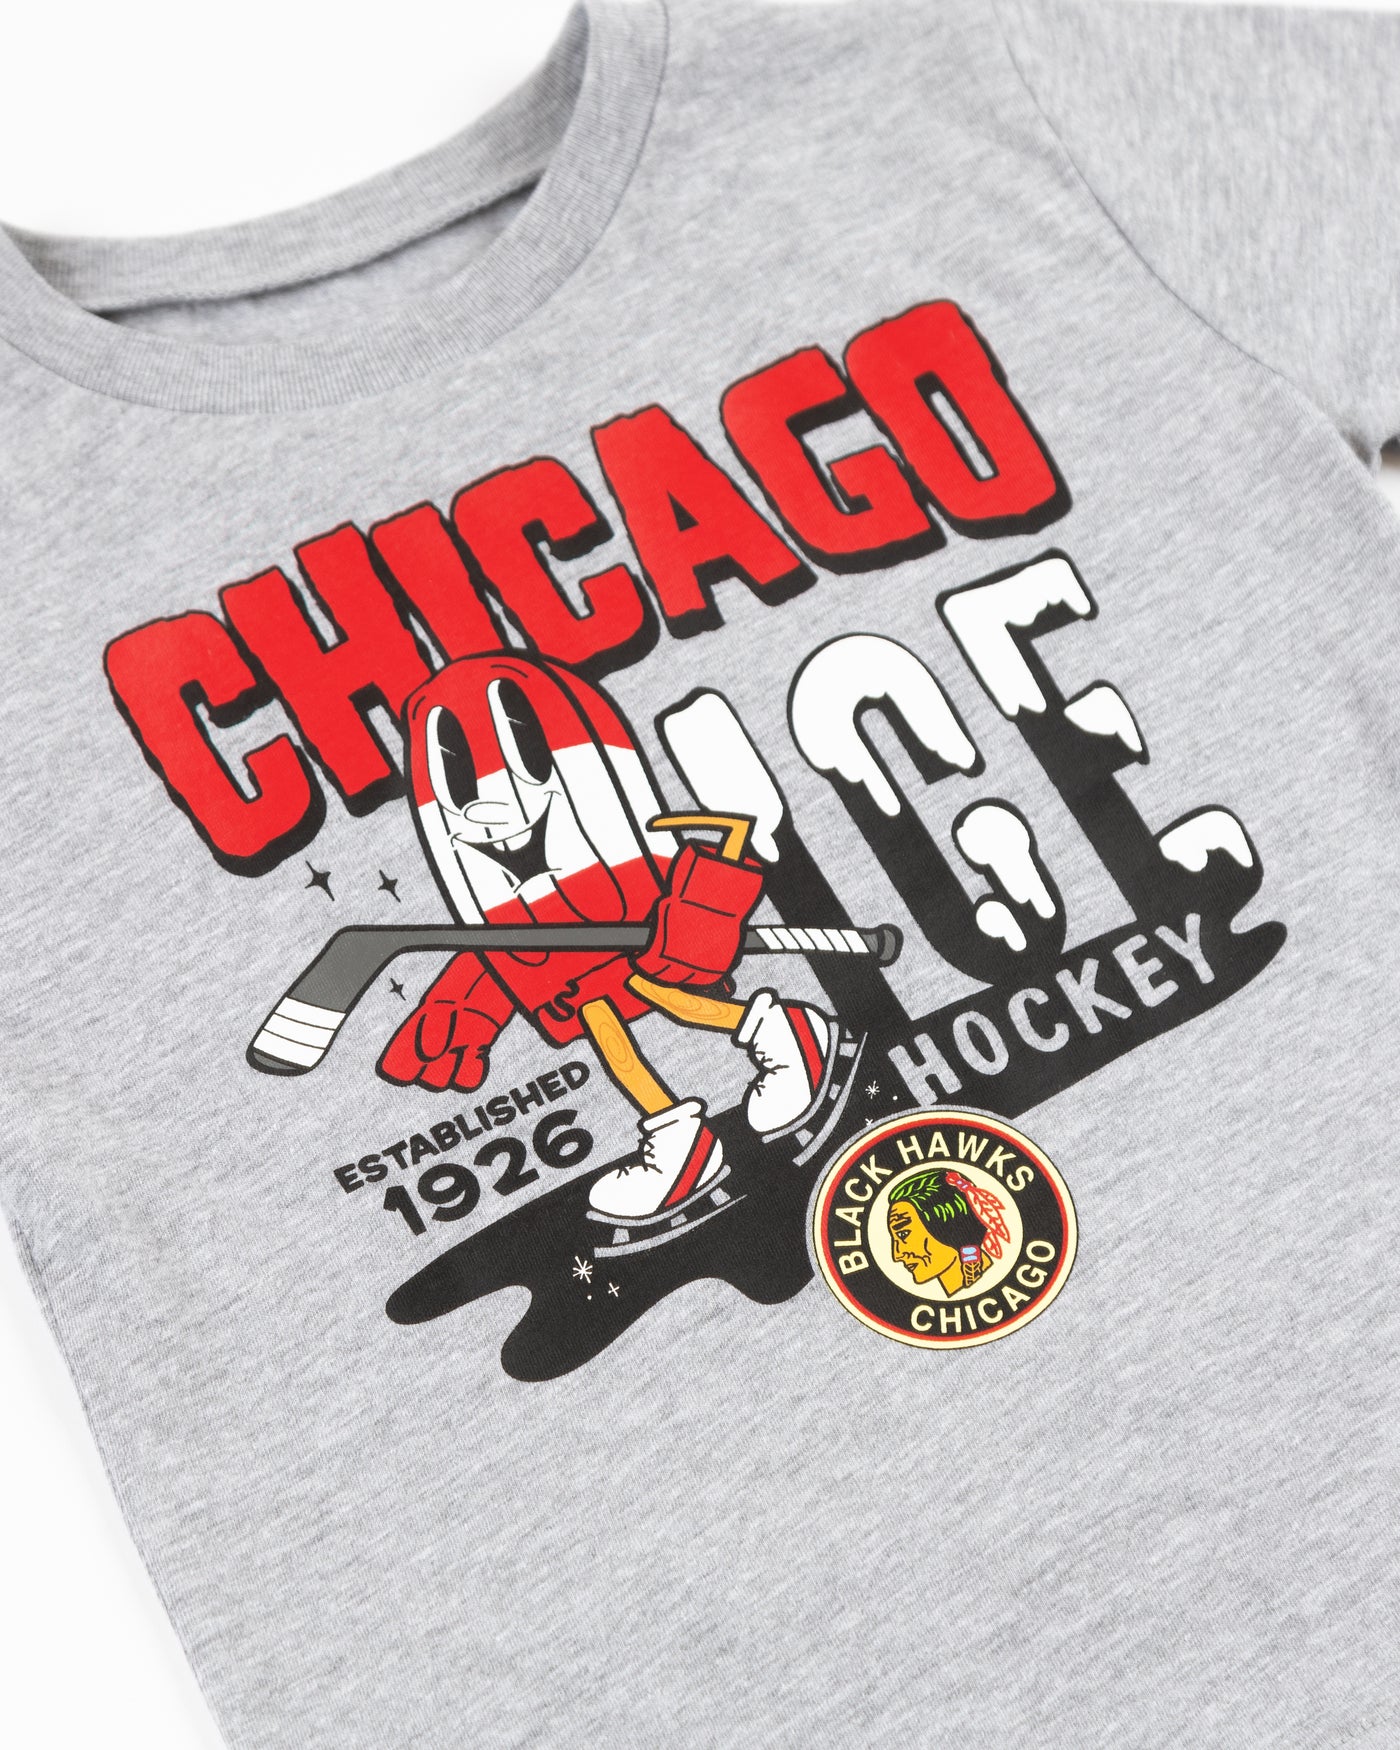 heather grey toddler Mitchell & Ness tee with ice pop animated hockey player character graphic on front - detail lay flat